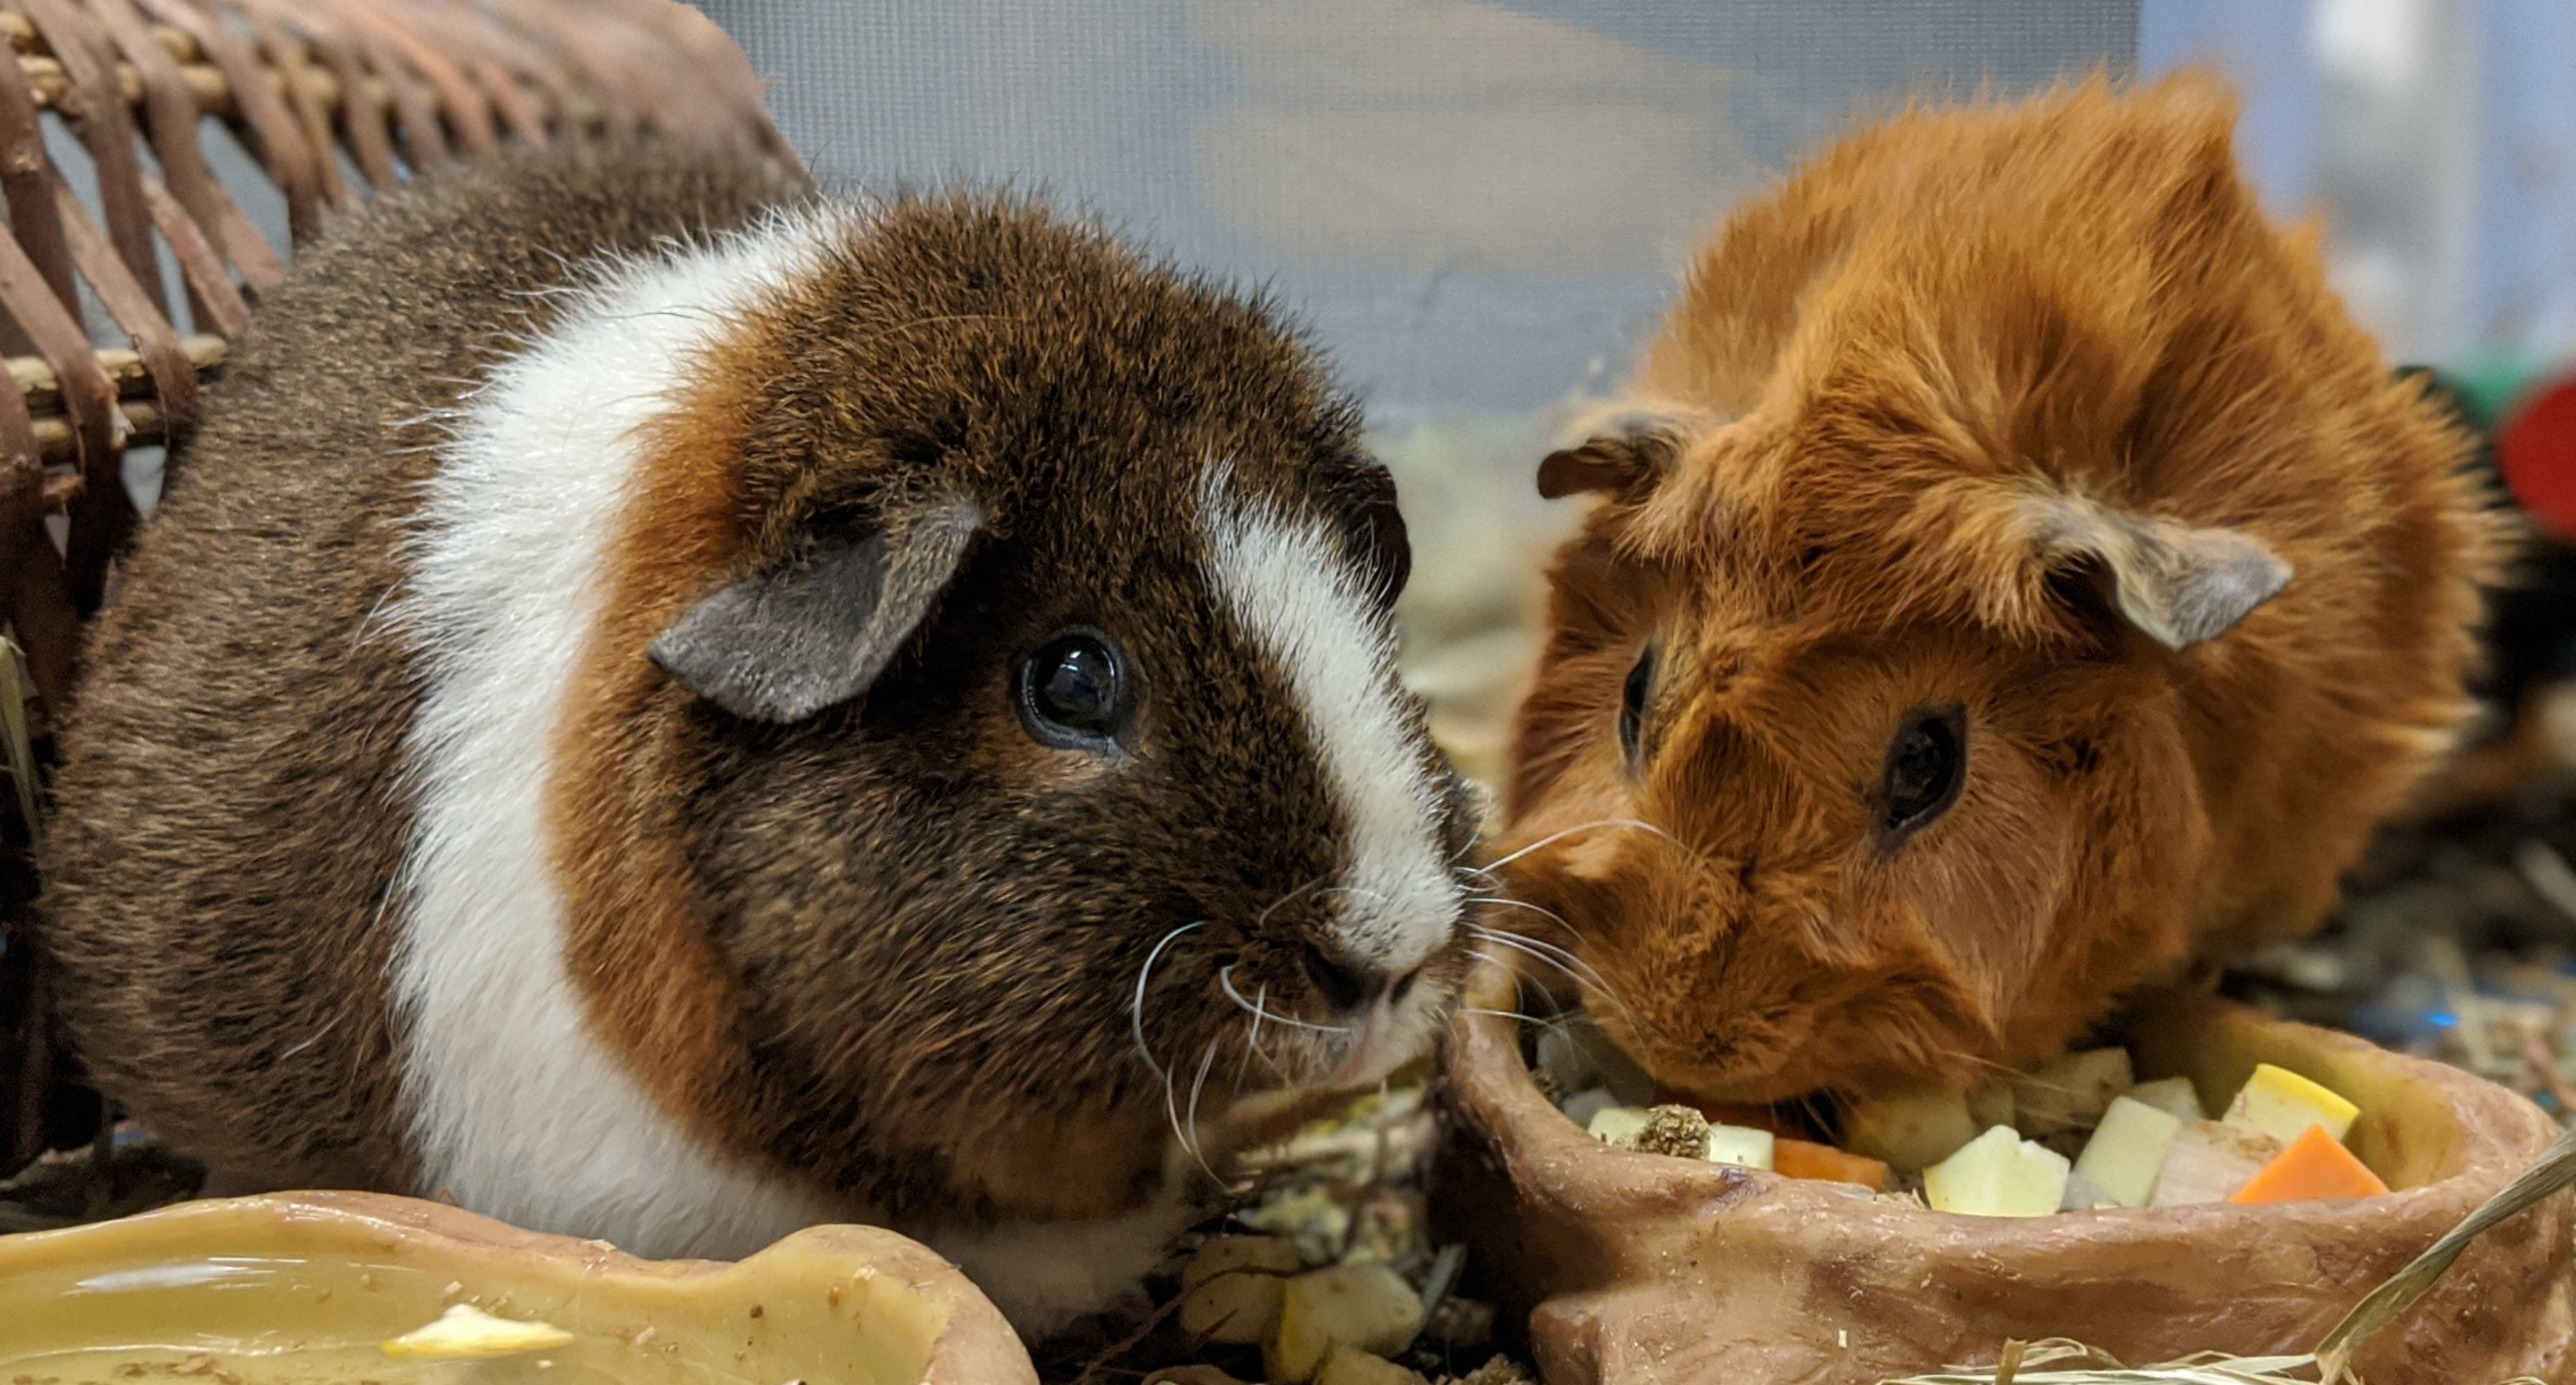 New at the Zoo: Guinea Pigs | Smithsonian's National Zoo